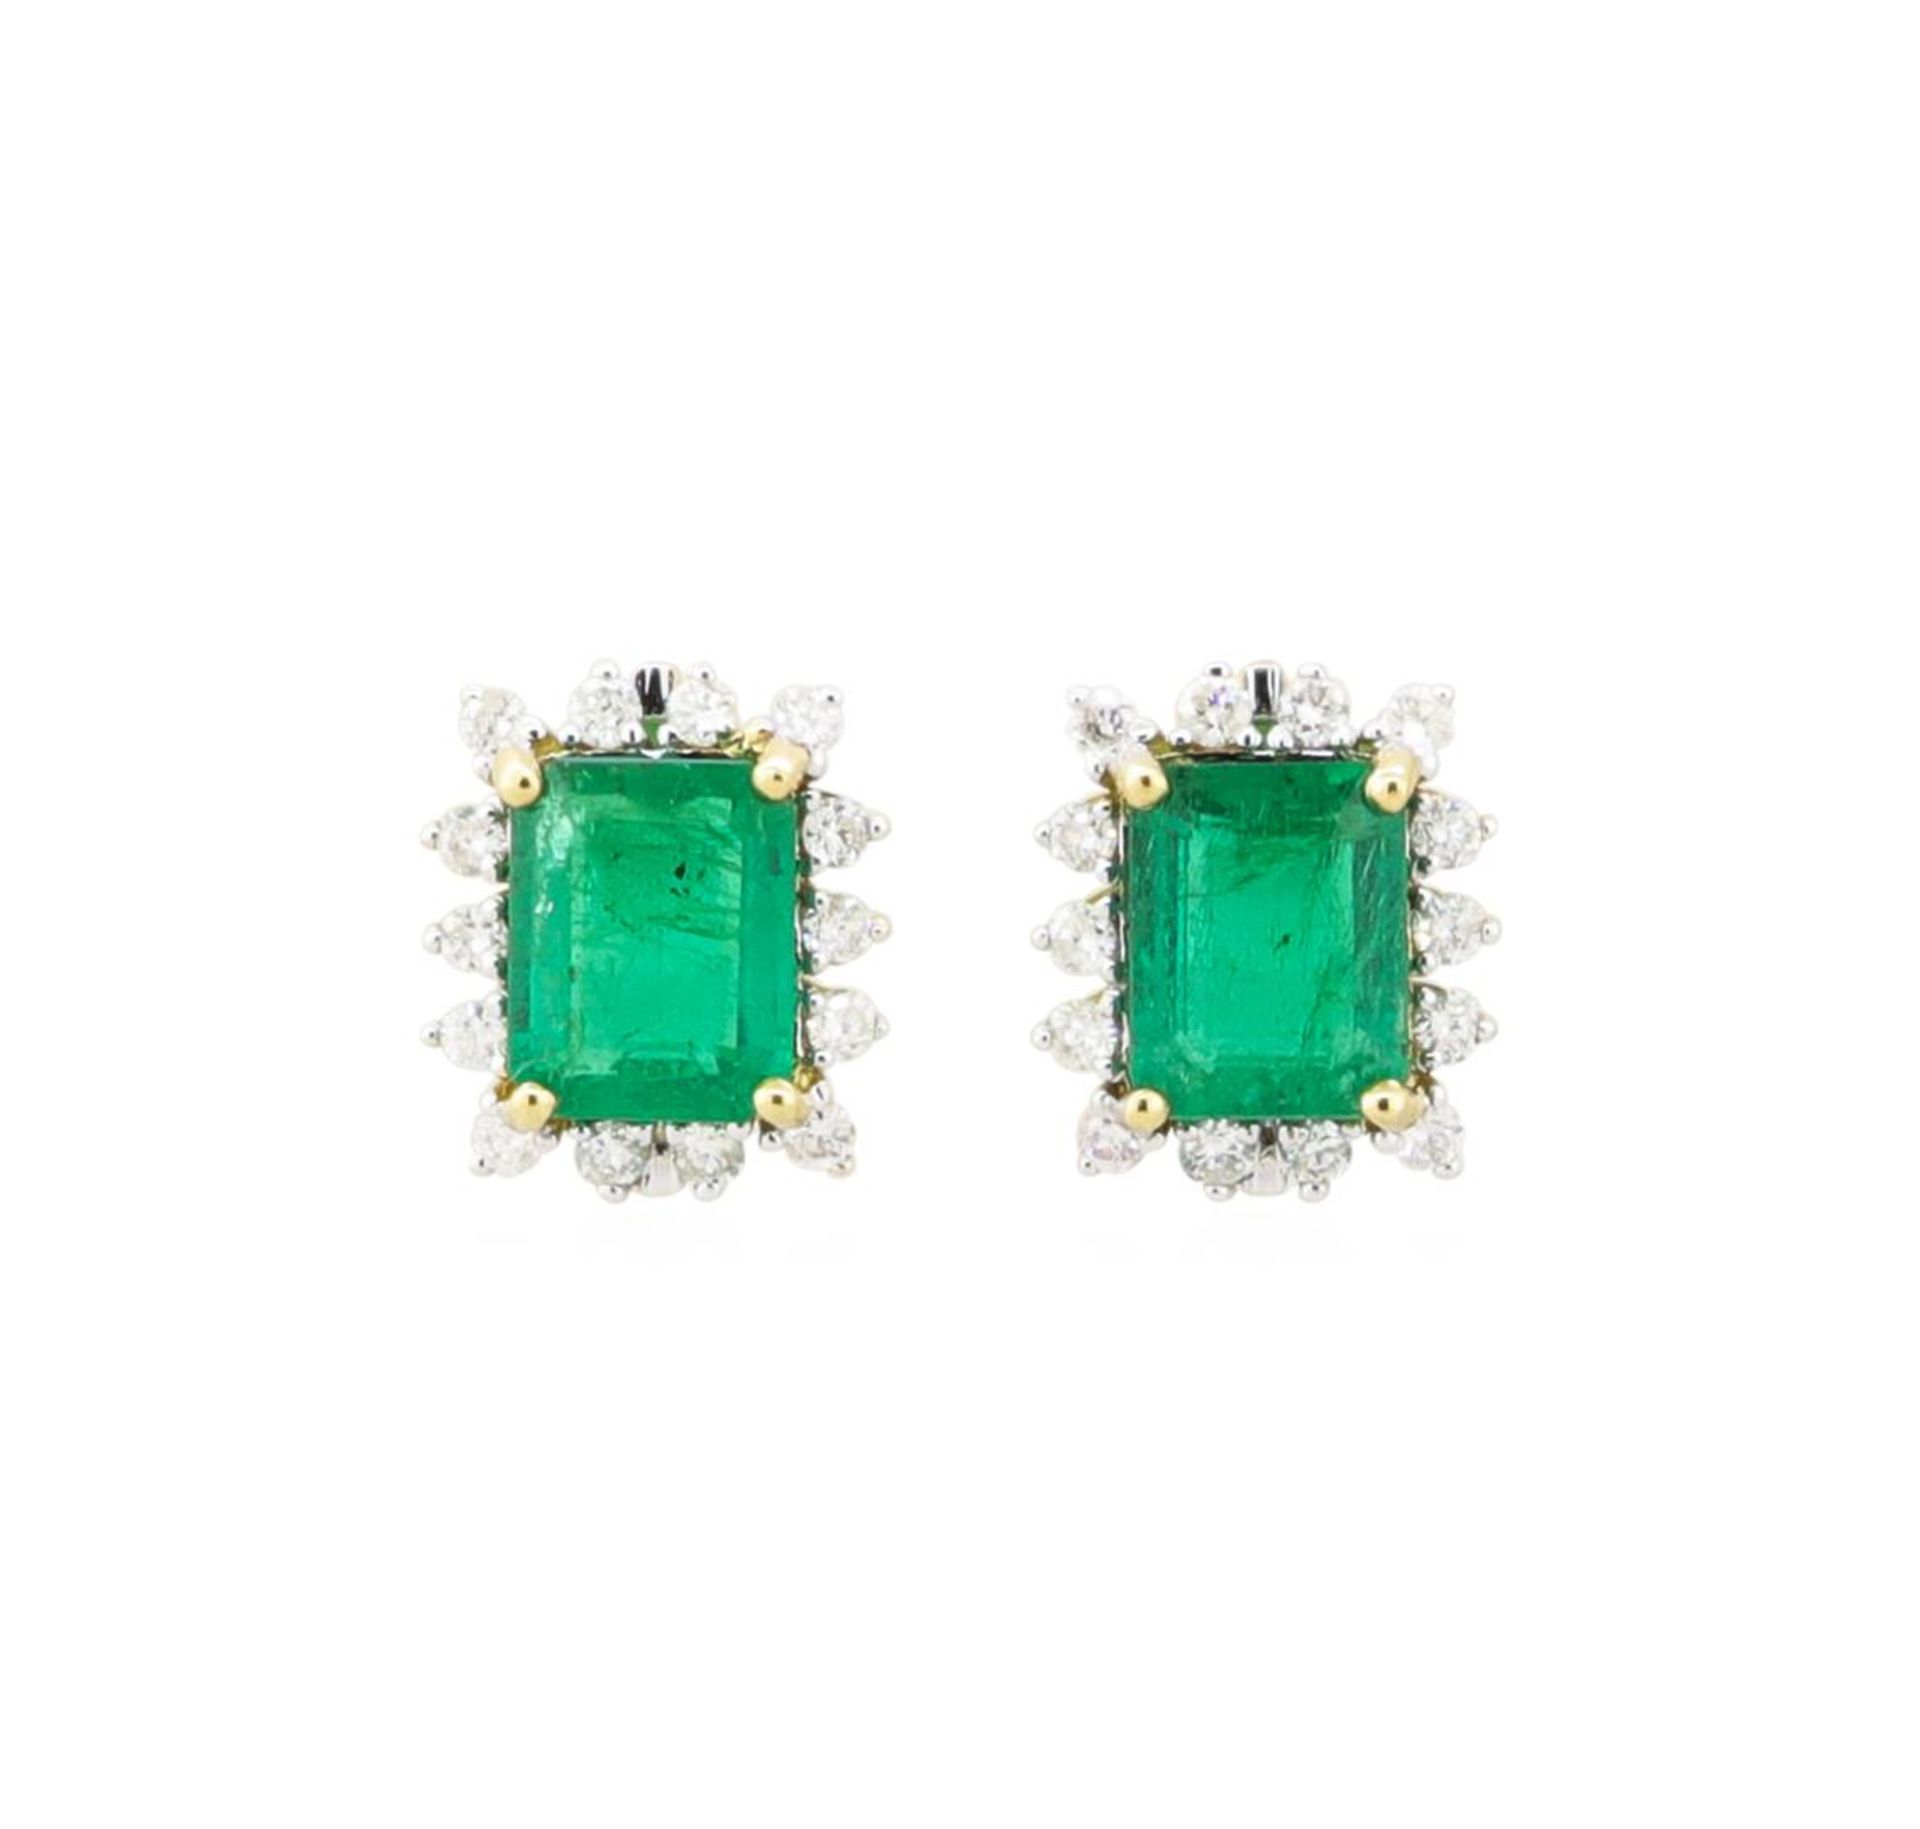 4.18ctw Emerald and Diamond Earrings - 18KT Yellow Gold